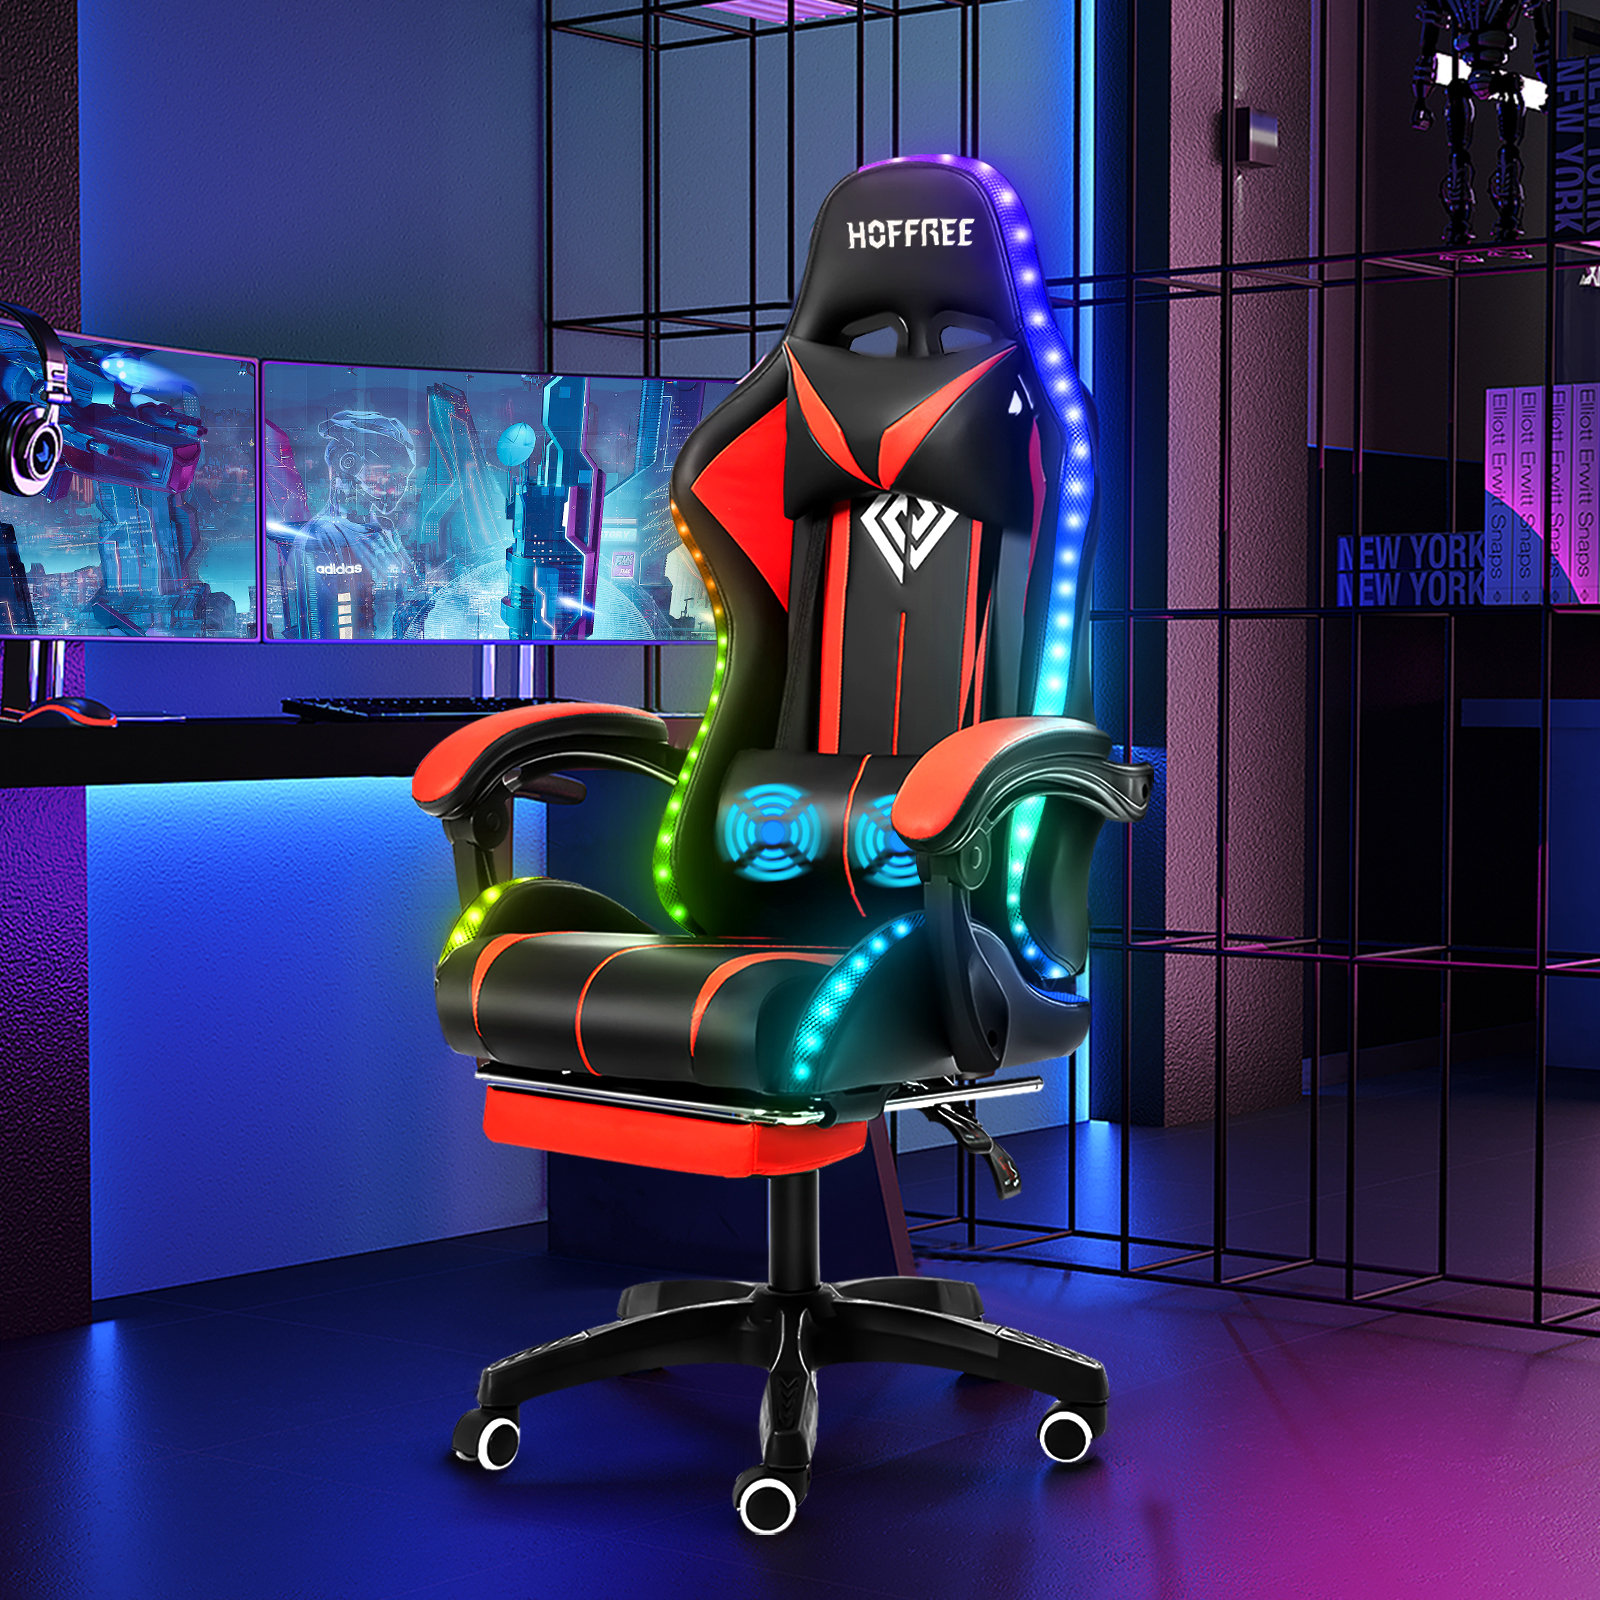 RGB Gaming Chair LED AND MASSAGE Ergonomic Blue, Red, Pink and Green